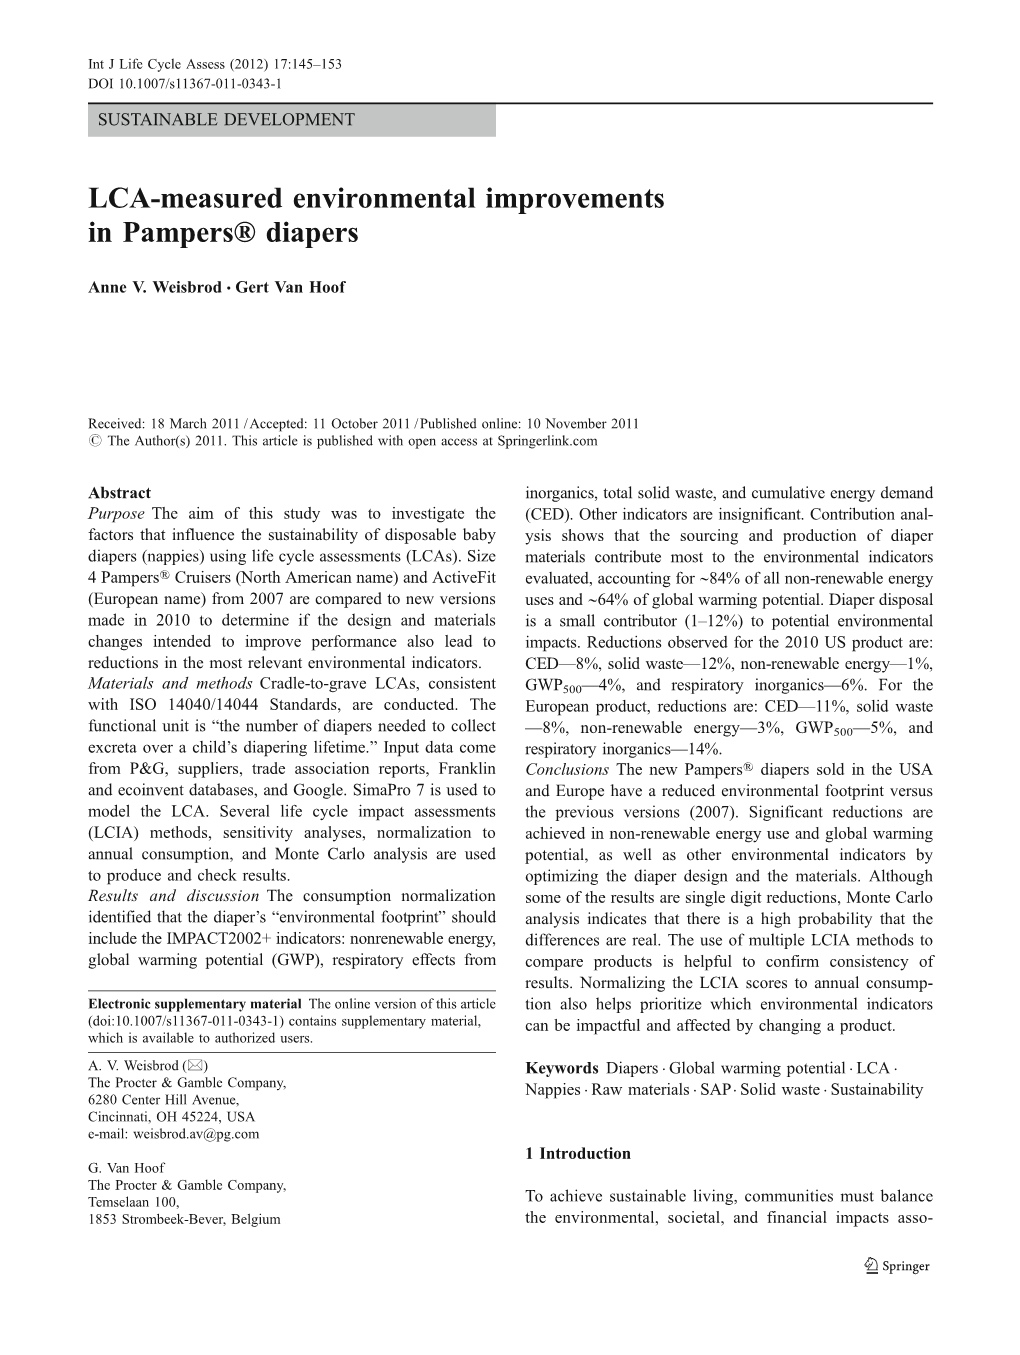 LCA-Measured Environmental Improvements in Pampers® Diapers